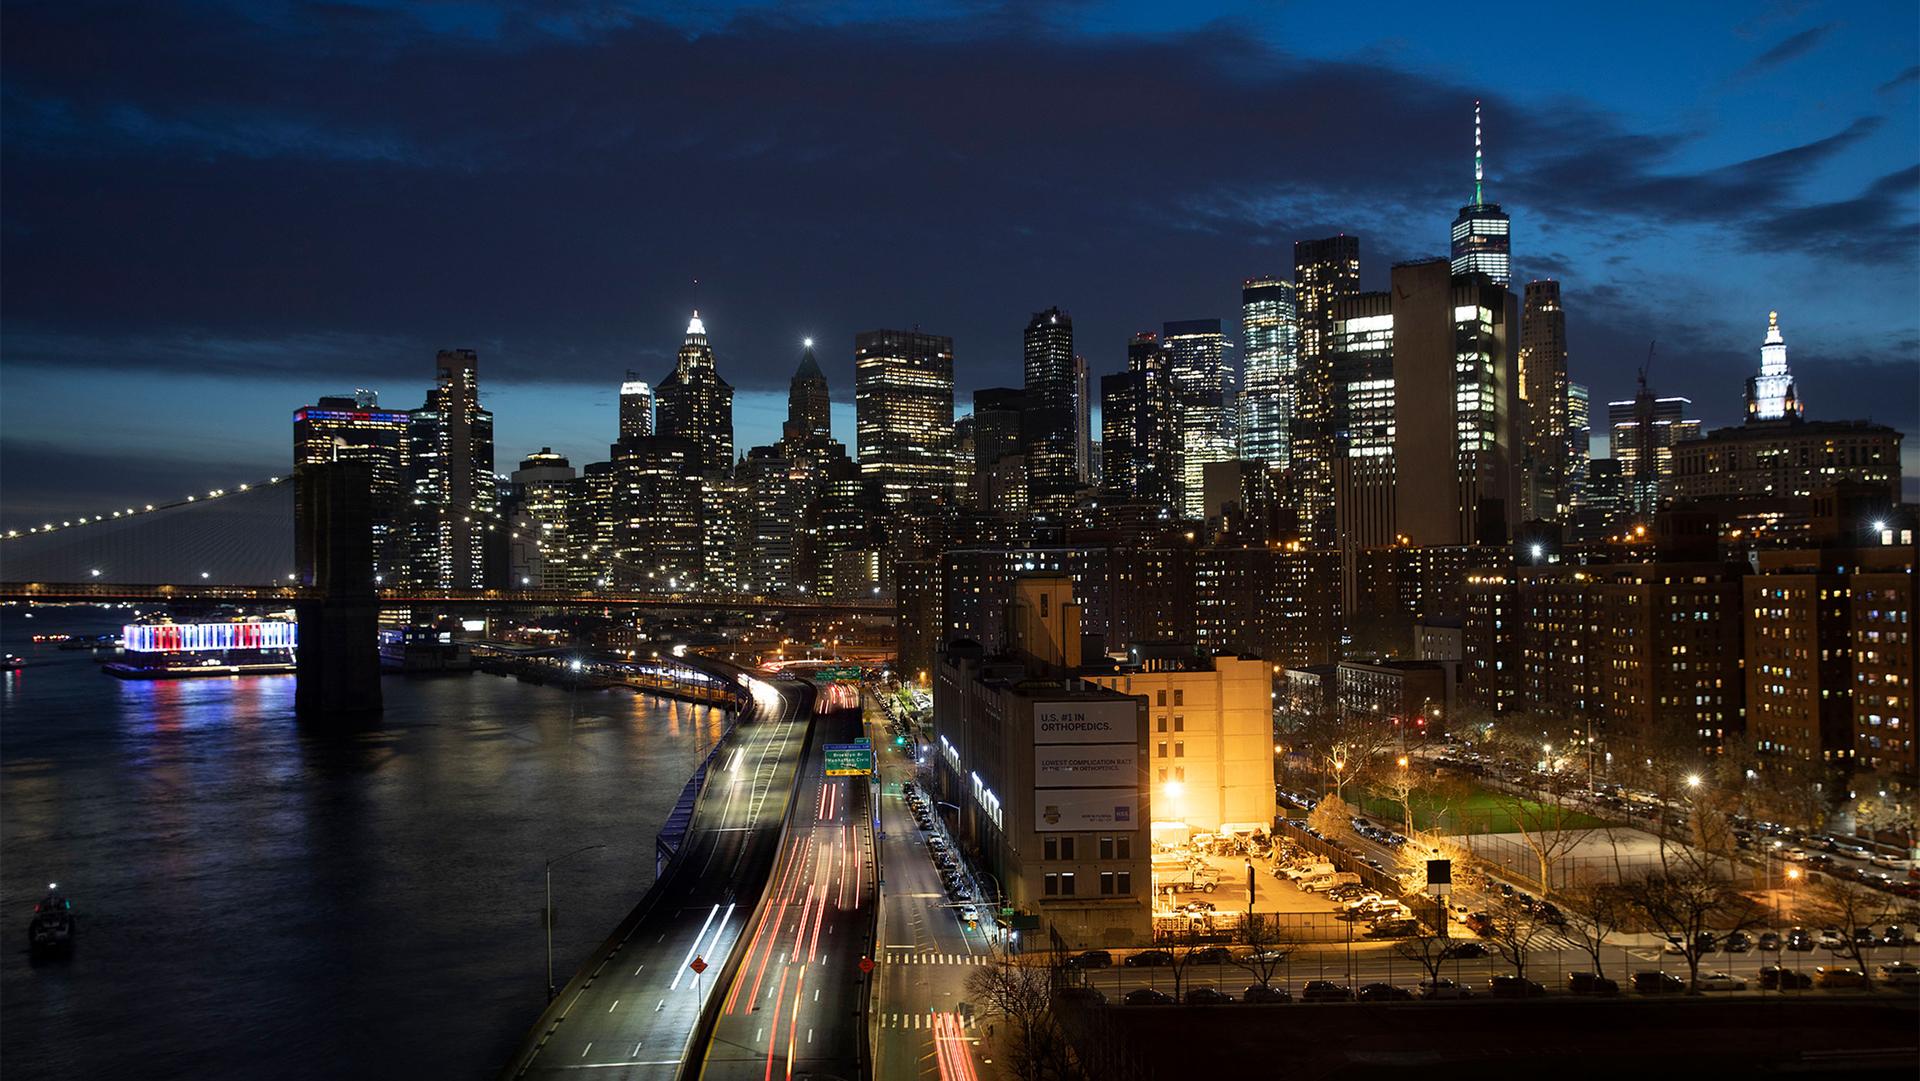 Cars head along FDR Drive next to the Manhattan skyline in New York